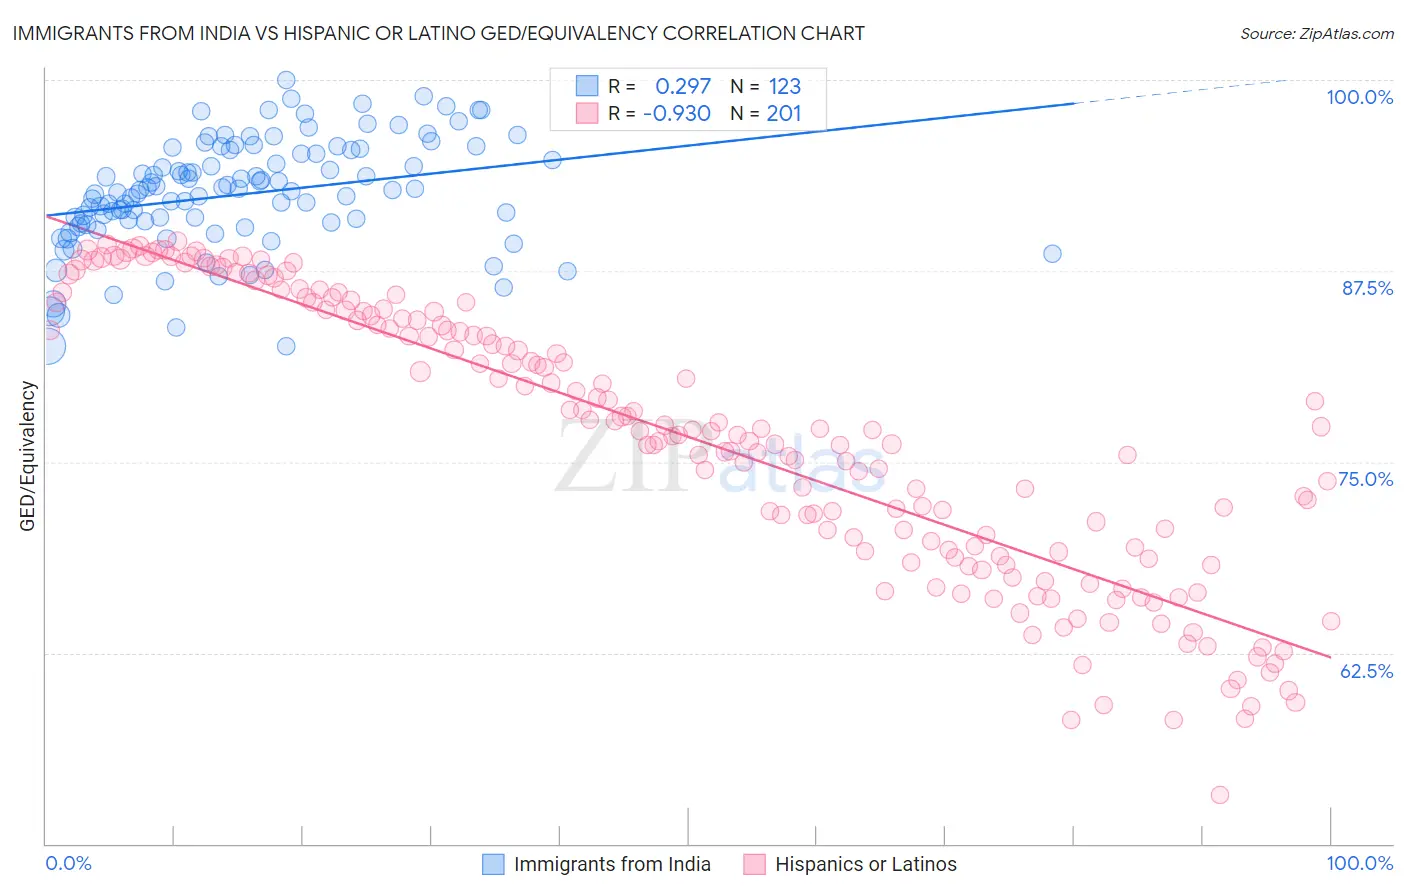 Immigrants from India vs Hispanic or Latino GED/Equivalency